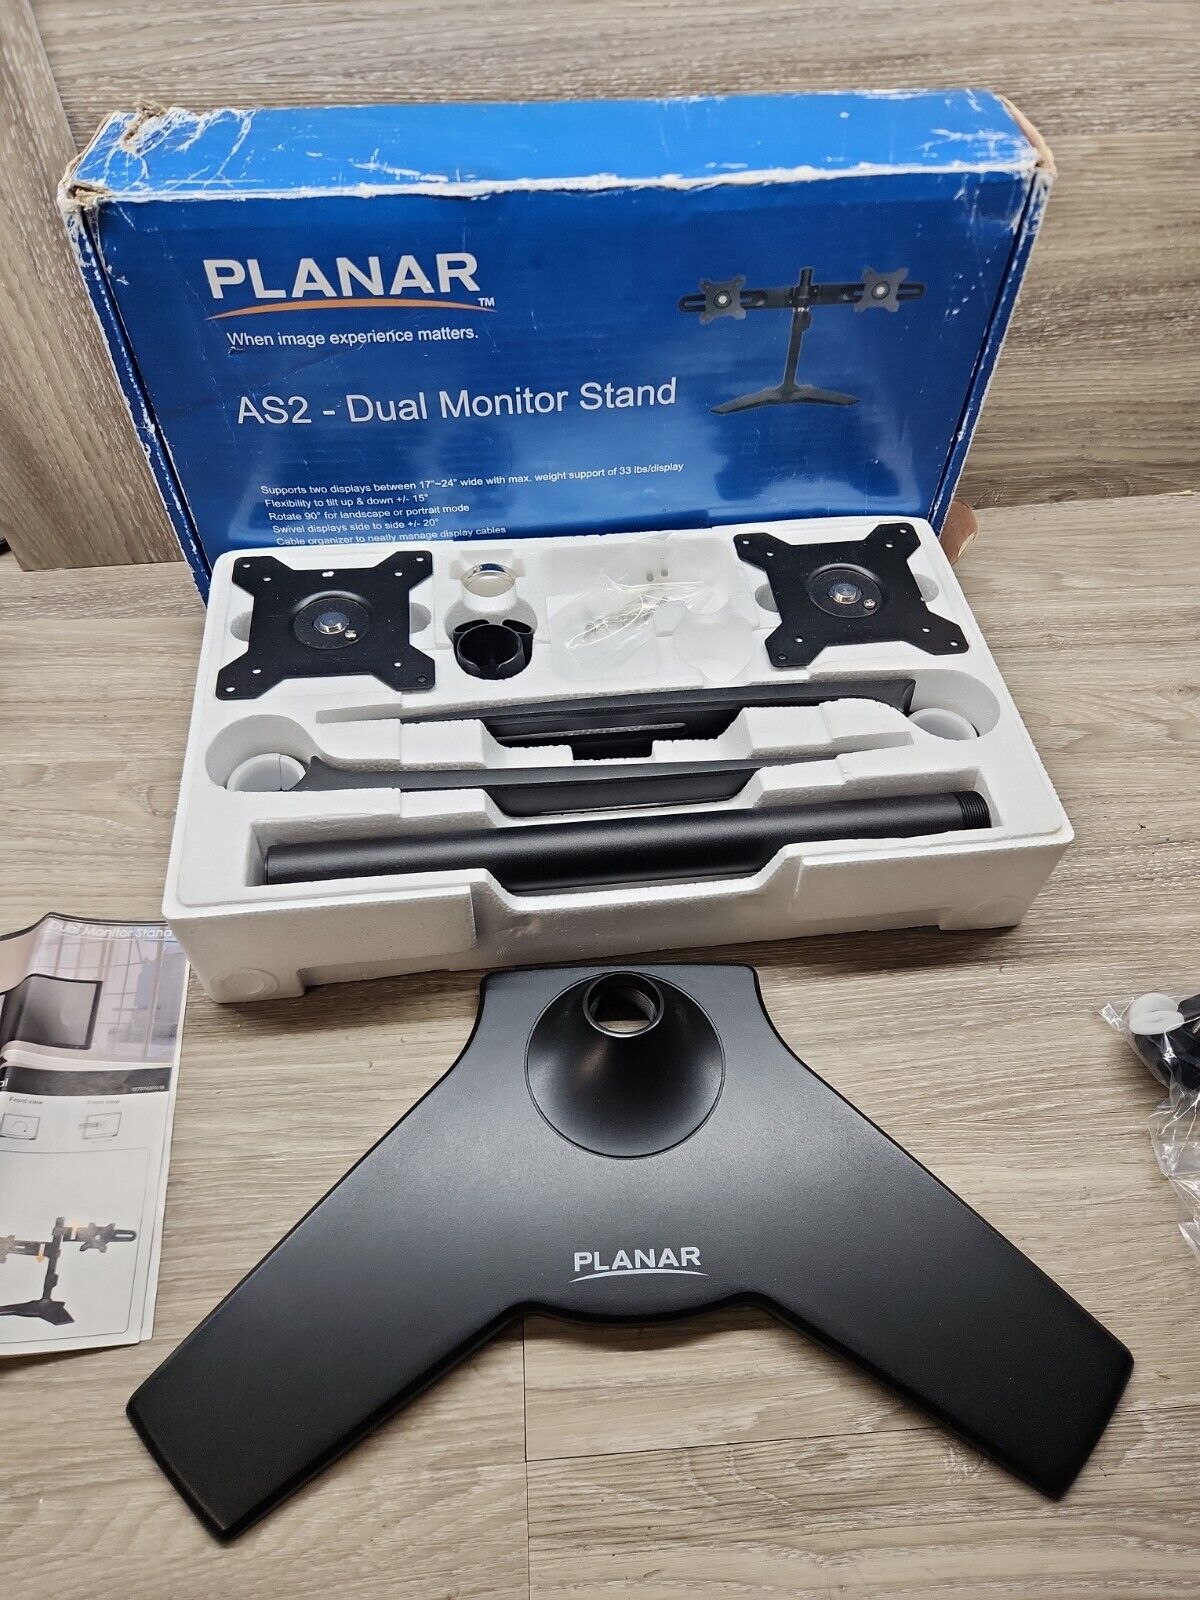 Planar AS2 Dual Monitor Stand - New in Open Box ( Damaged Box) Complete 